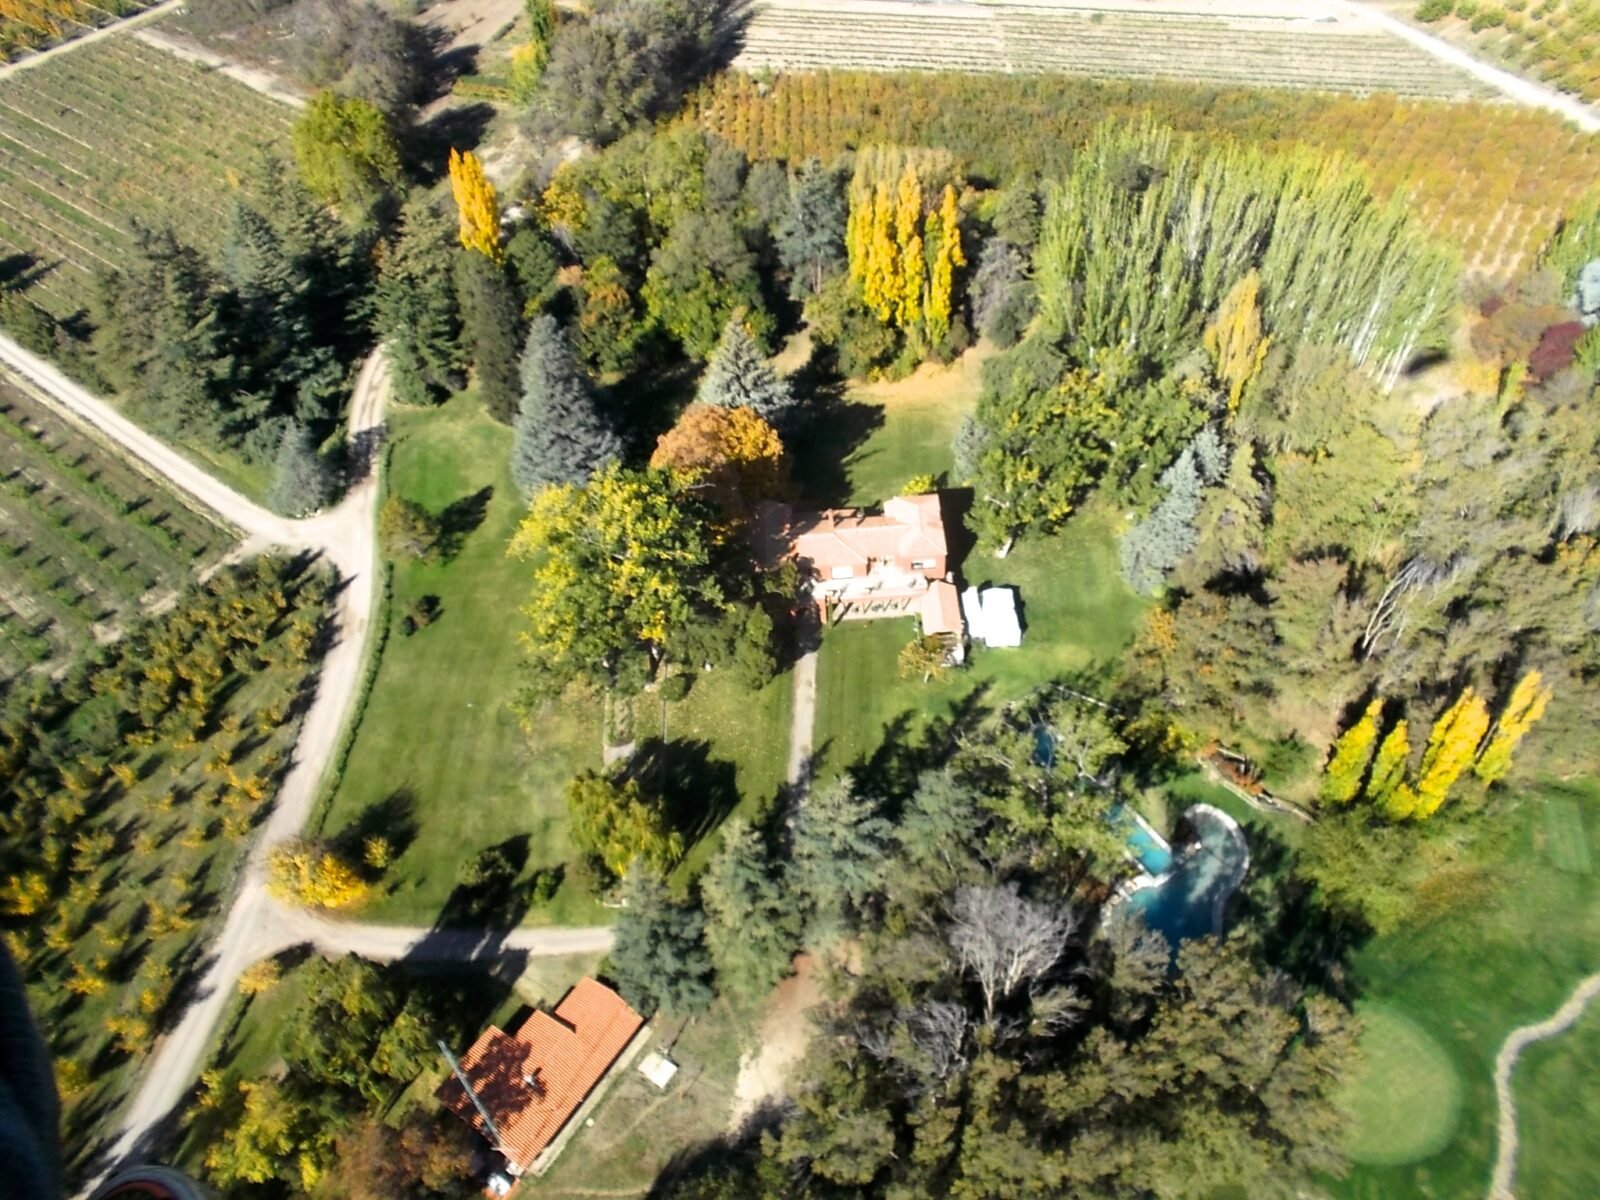 Birds view of the Estate